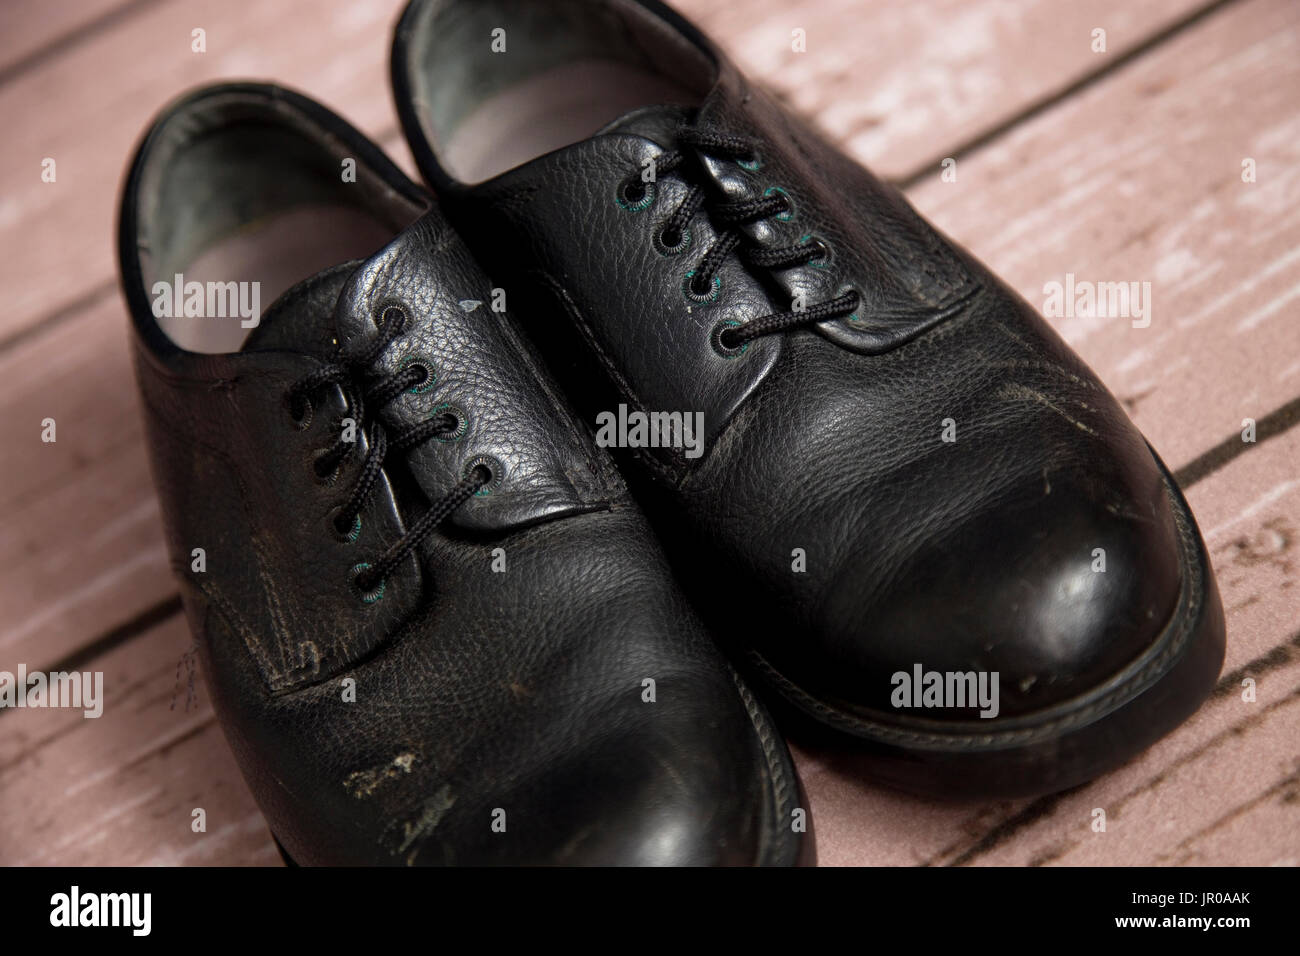 Old Black Dress Shoes on a Wooden Floor Stock Photo - Alamy